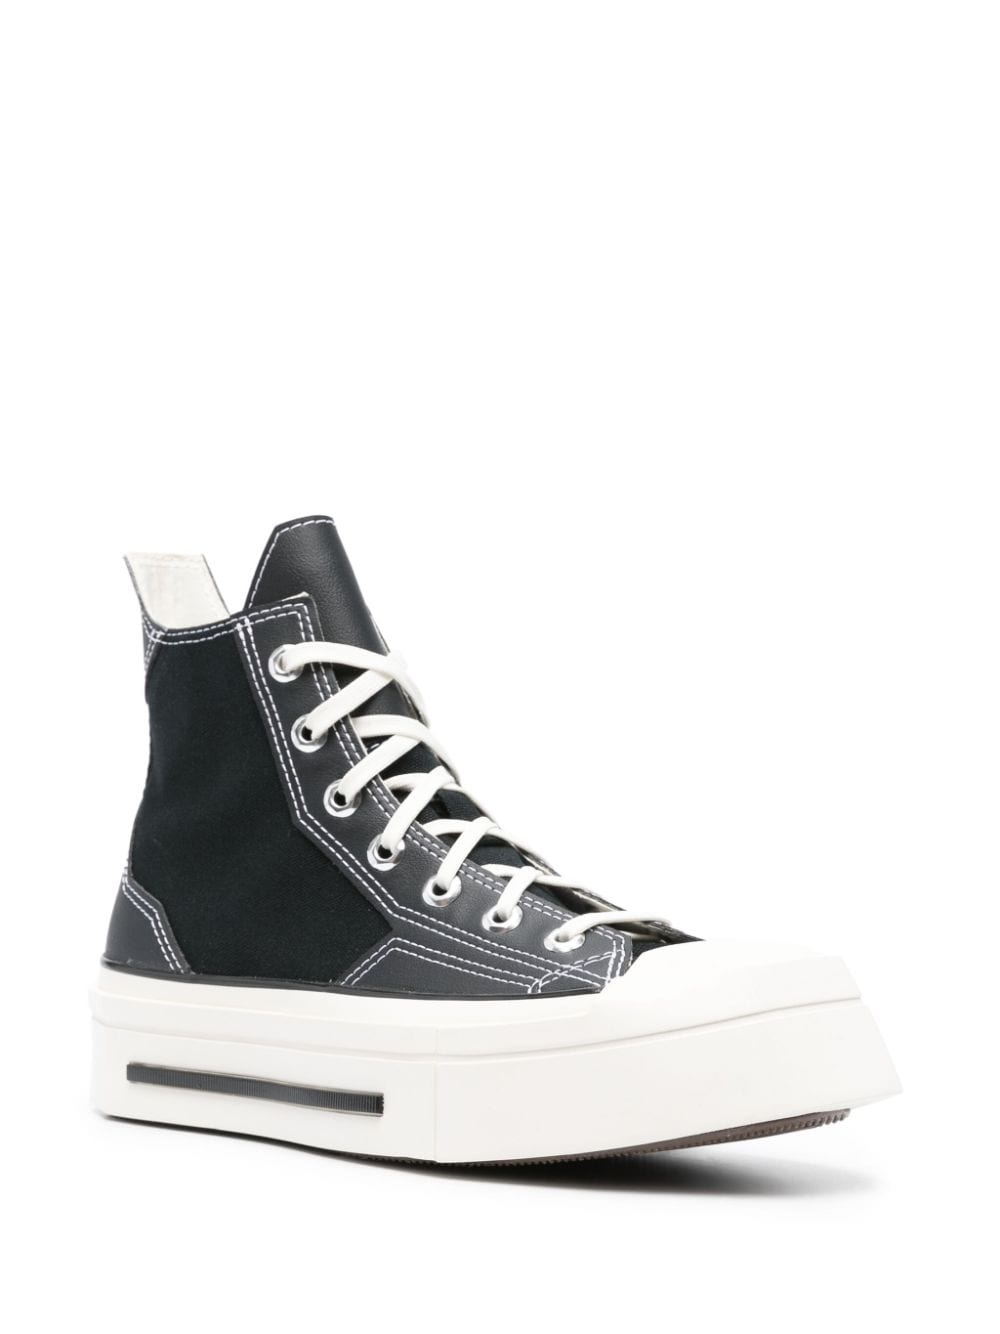 Chuck 70 De Luxe Squared sneakers - 2